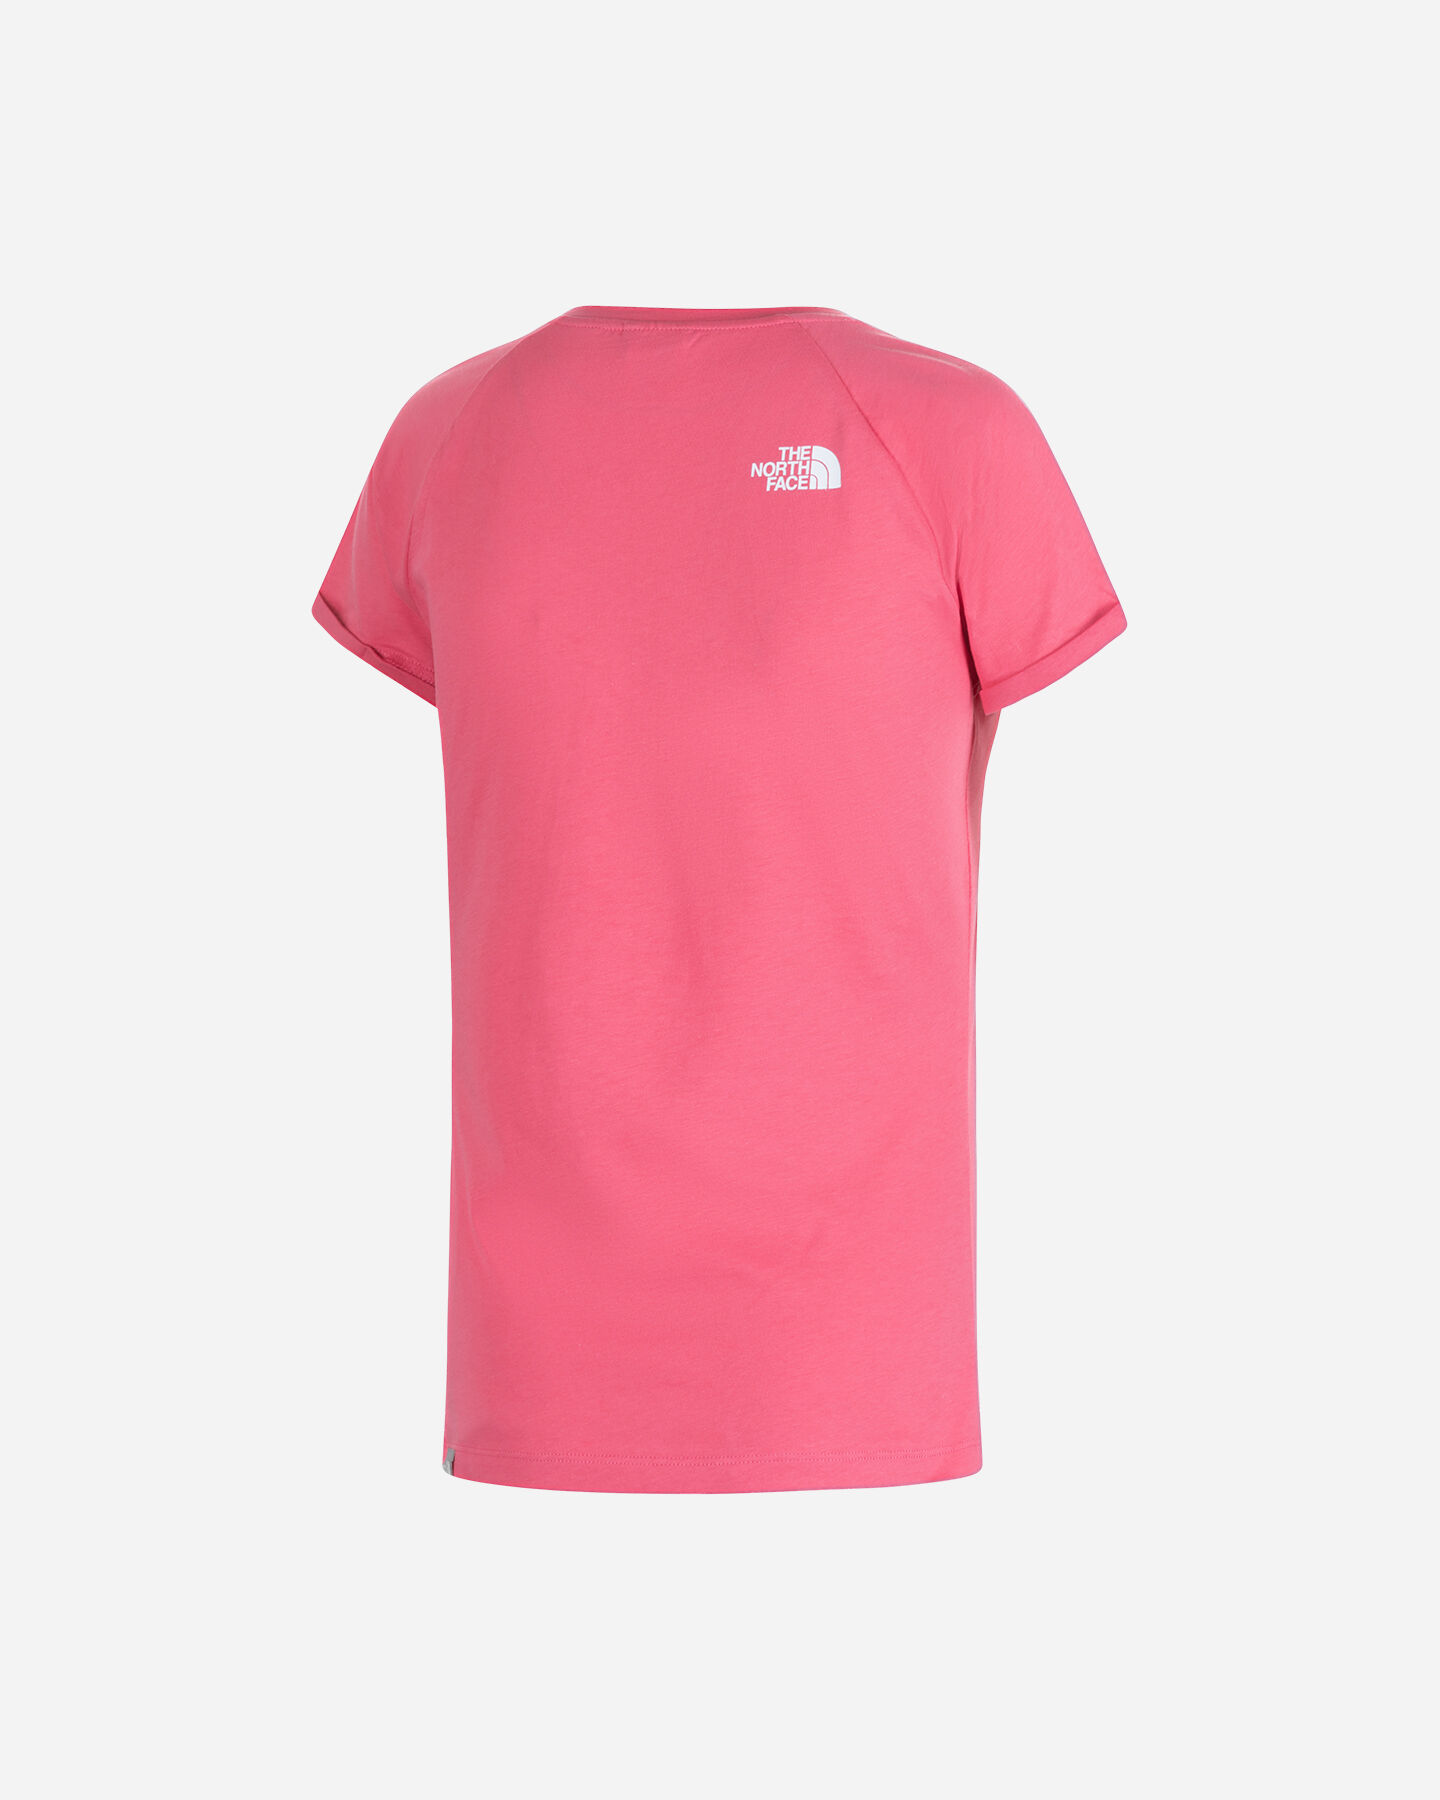  T-Shirt THE NORTH FACE LOGO ALL OVER W S5537261|N0T|XS scatto 1